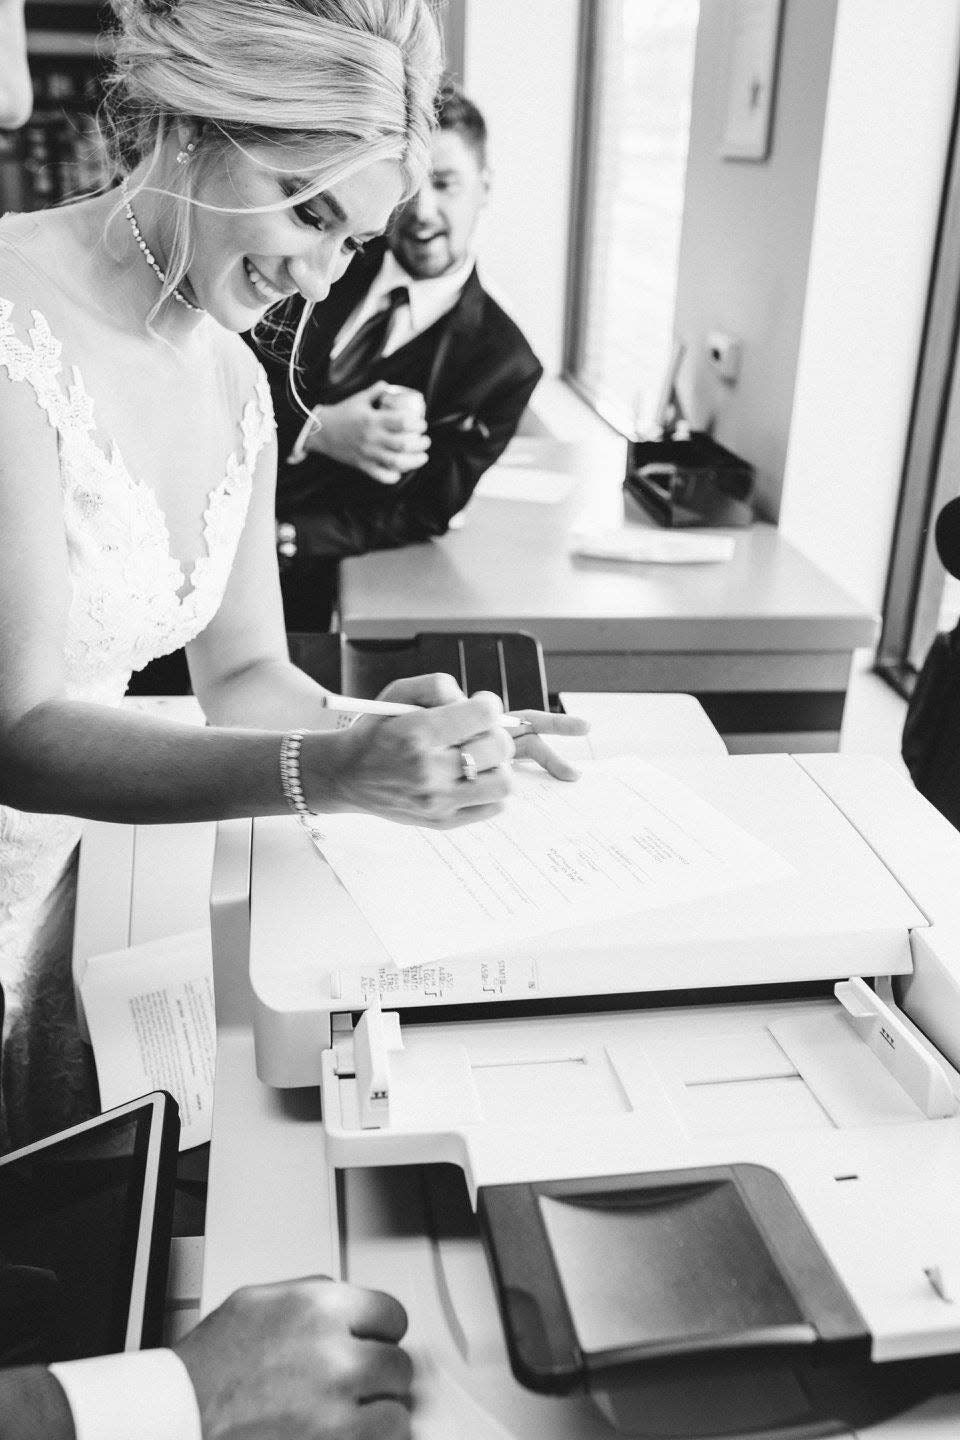 Jeanna Trotman, who grew up in Sterling Heights and recently returned to work as a sports reporter at WXYZ-TV, signs her husband Zach's contract as a witness with the Pittsburgh Penguins at a FedEx Kinko's in Detroit on their wedding day July 1, 2017.